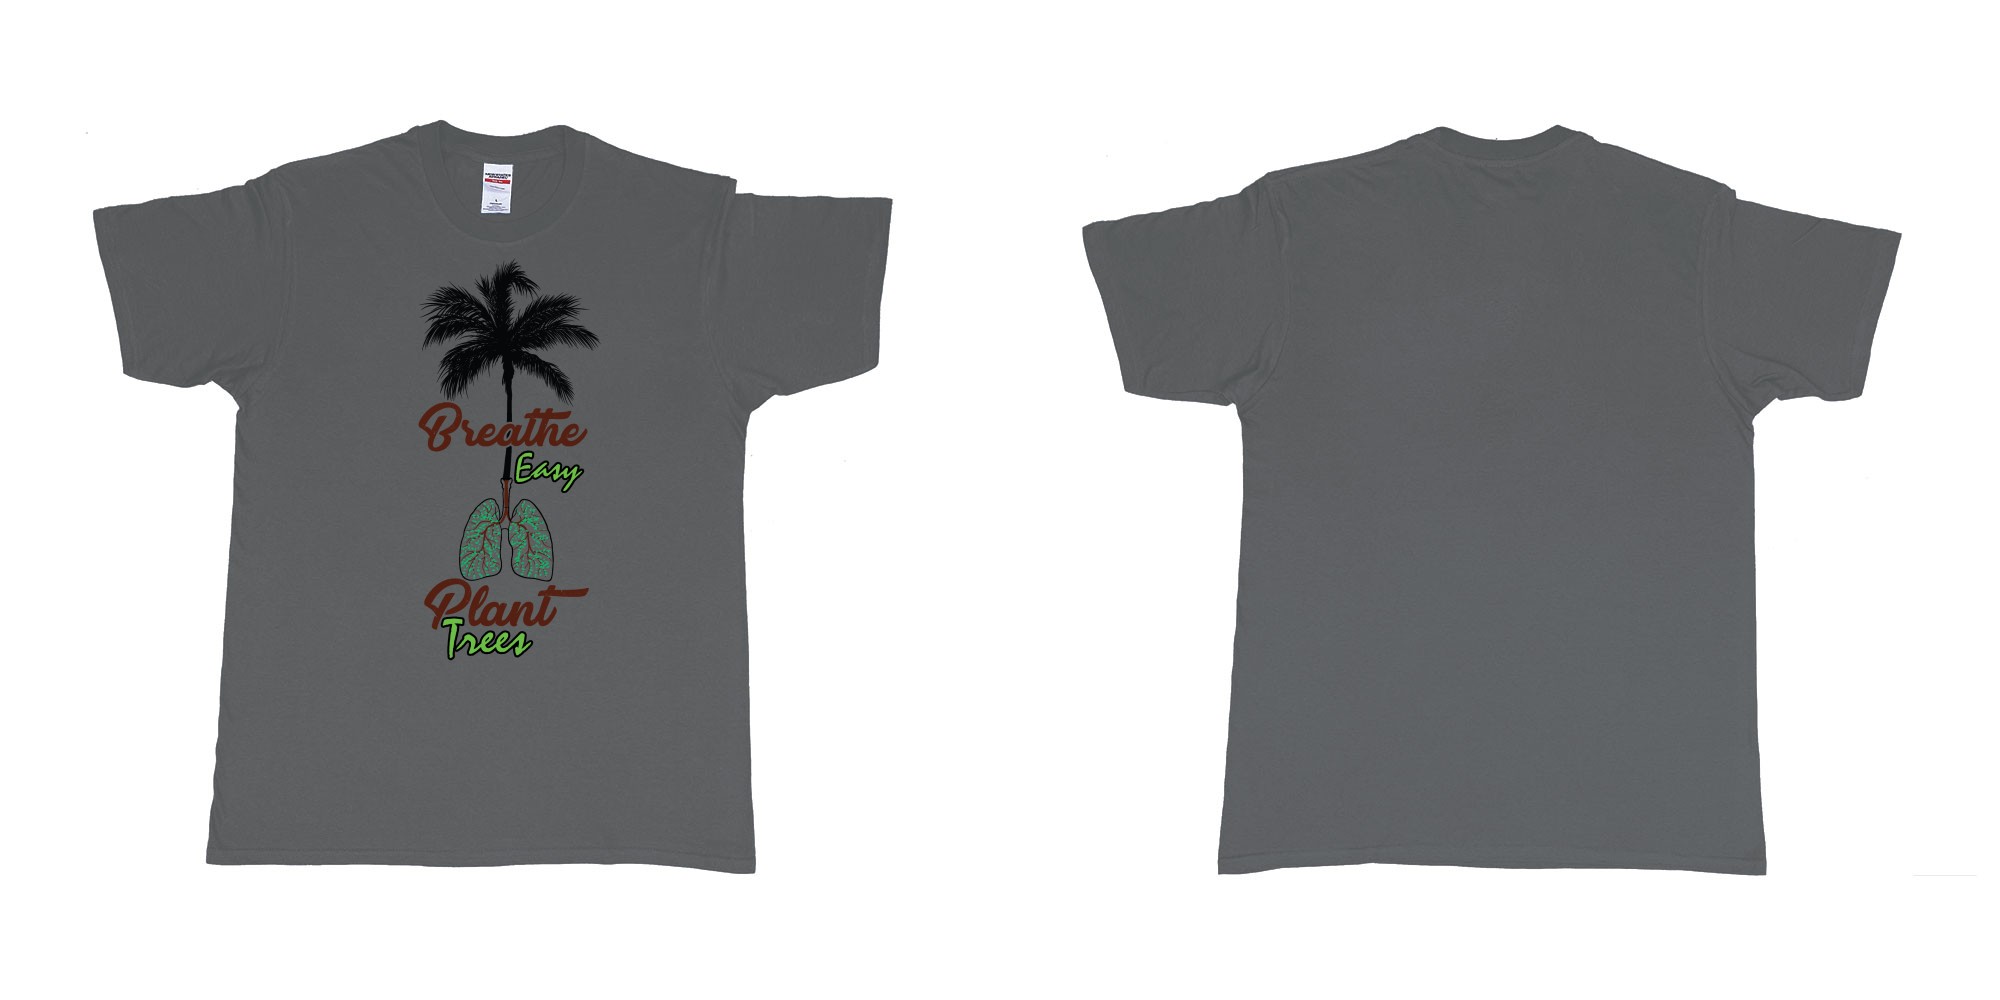 Custom tshirt design breathe easy and plant a tree for better air for everyone in fabric color charcoal choice your own text made in Bali by The Pirate Way